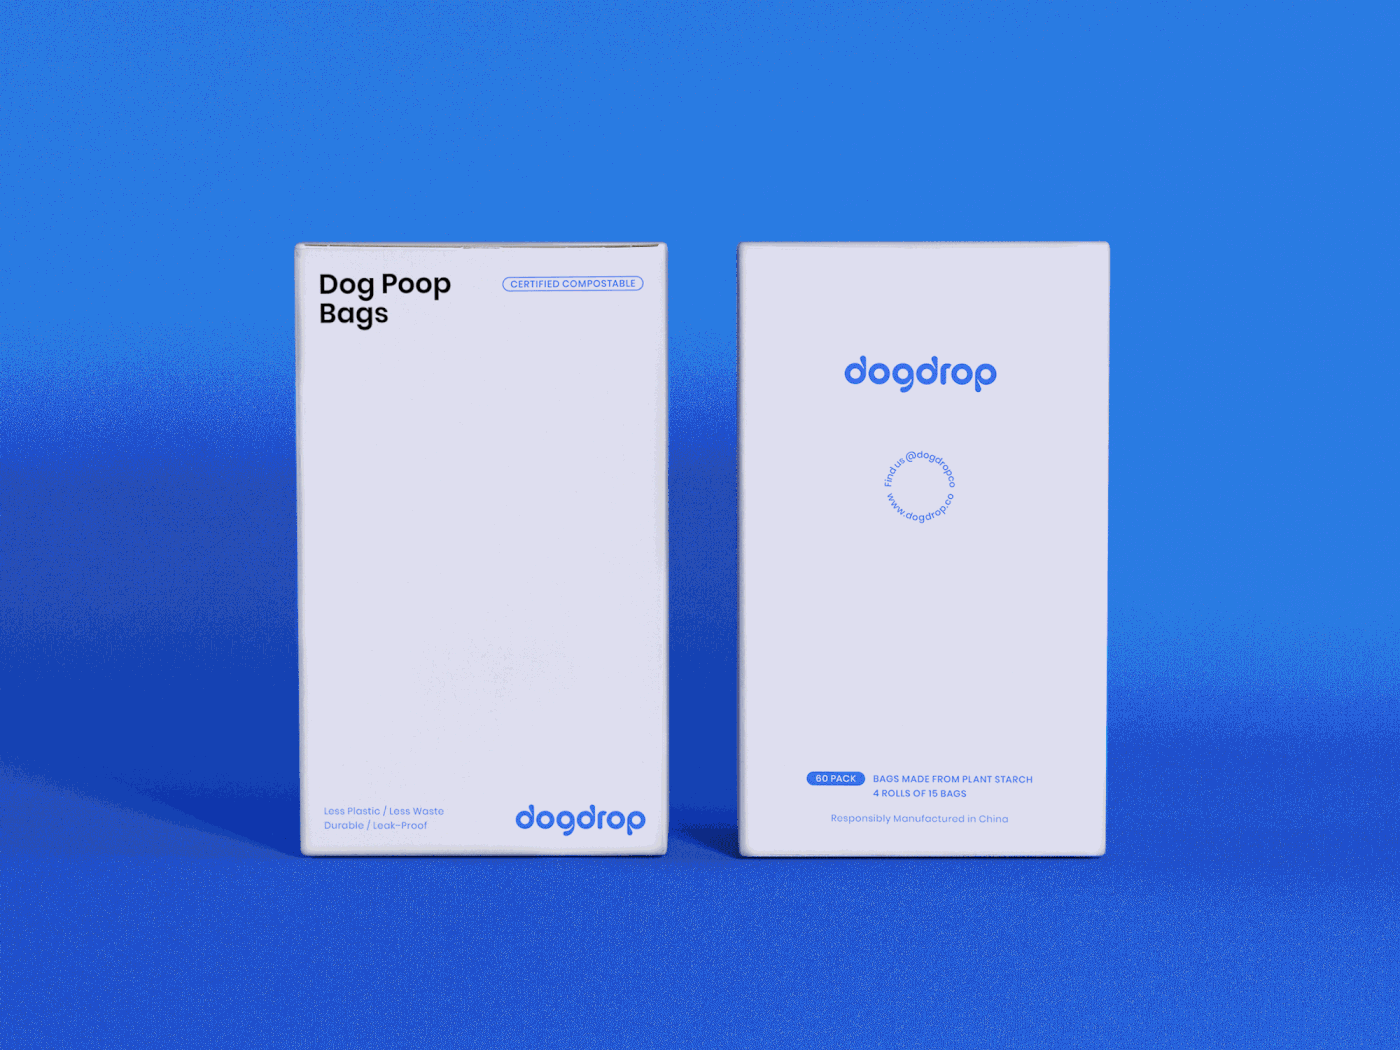 Packaging example #668: The Dogdrop's Packaging